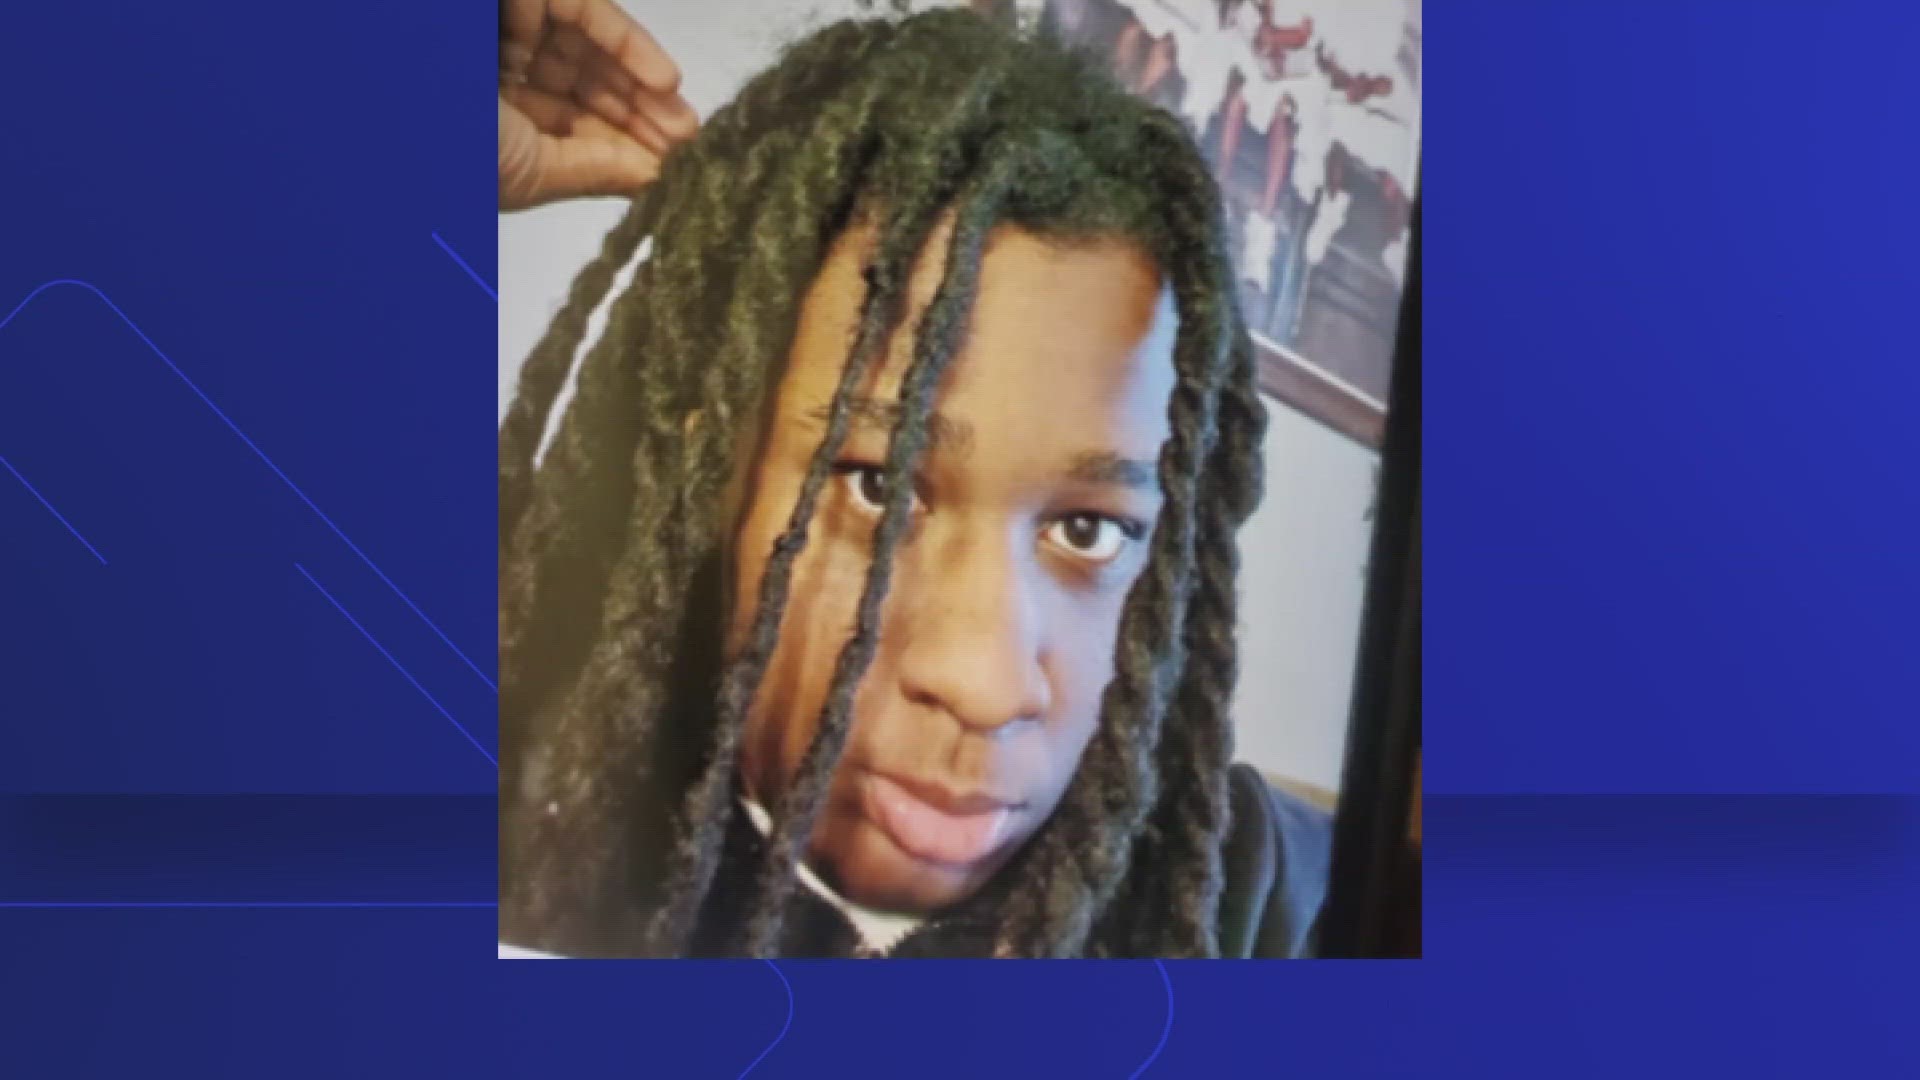 The juvenile has been identified as 14-year-old Irving Laboard of Northeast, D.C. He was reported missing several times throughout the year.